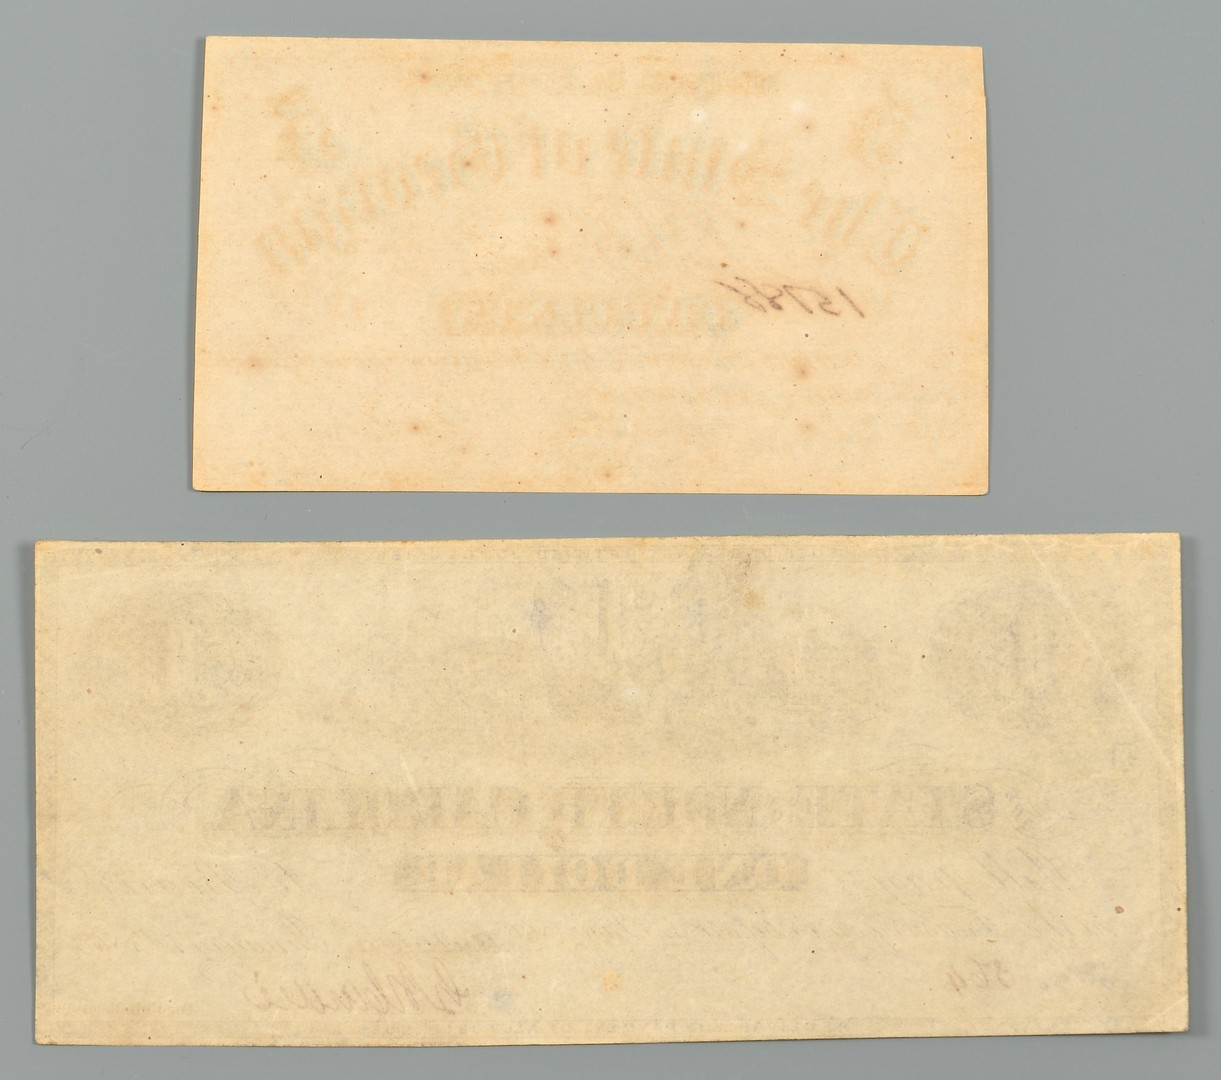 Lot 554: Collection of Confederate Currency, 6 items